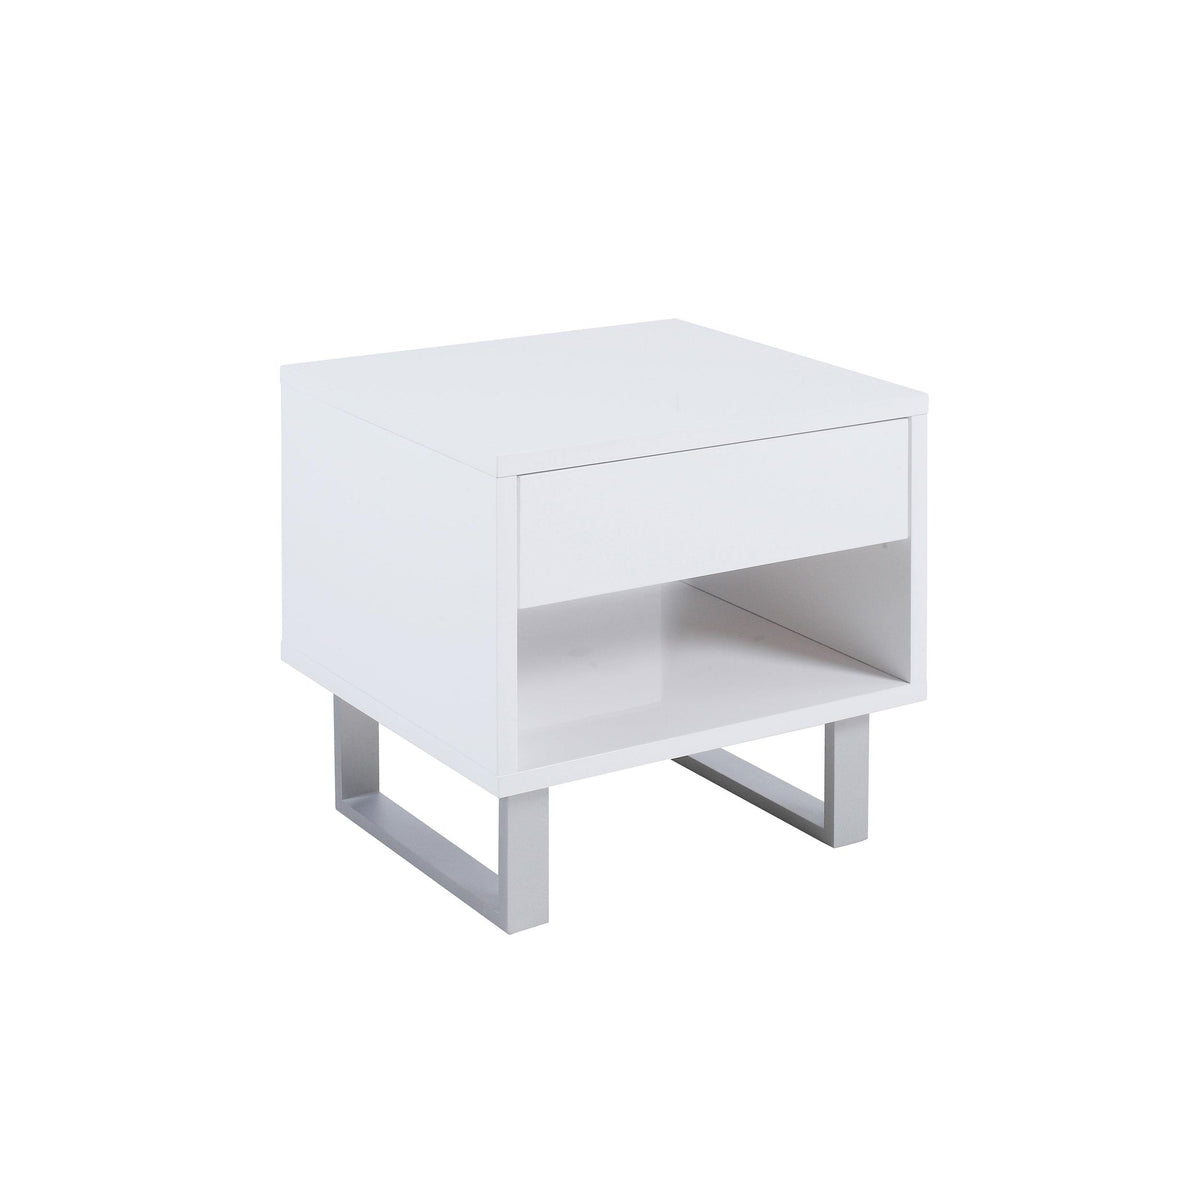 Atchison 1-drawer End Table High Glossy White Atchison 1-drawer End Table High Glossy White Half Price Furniture